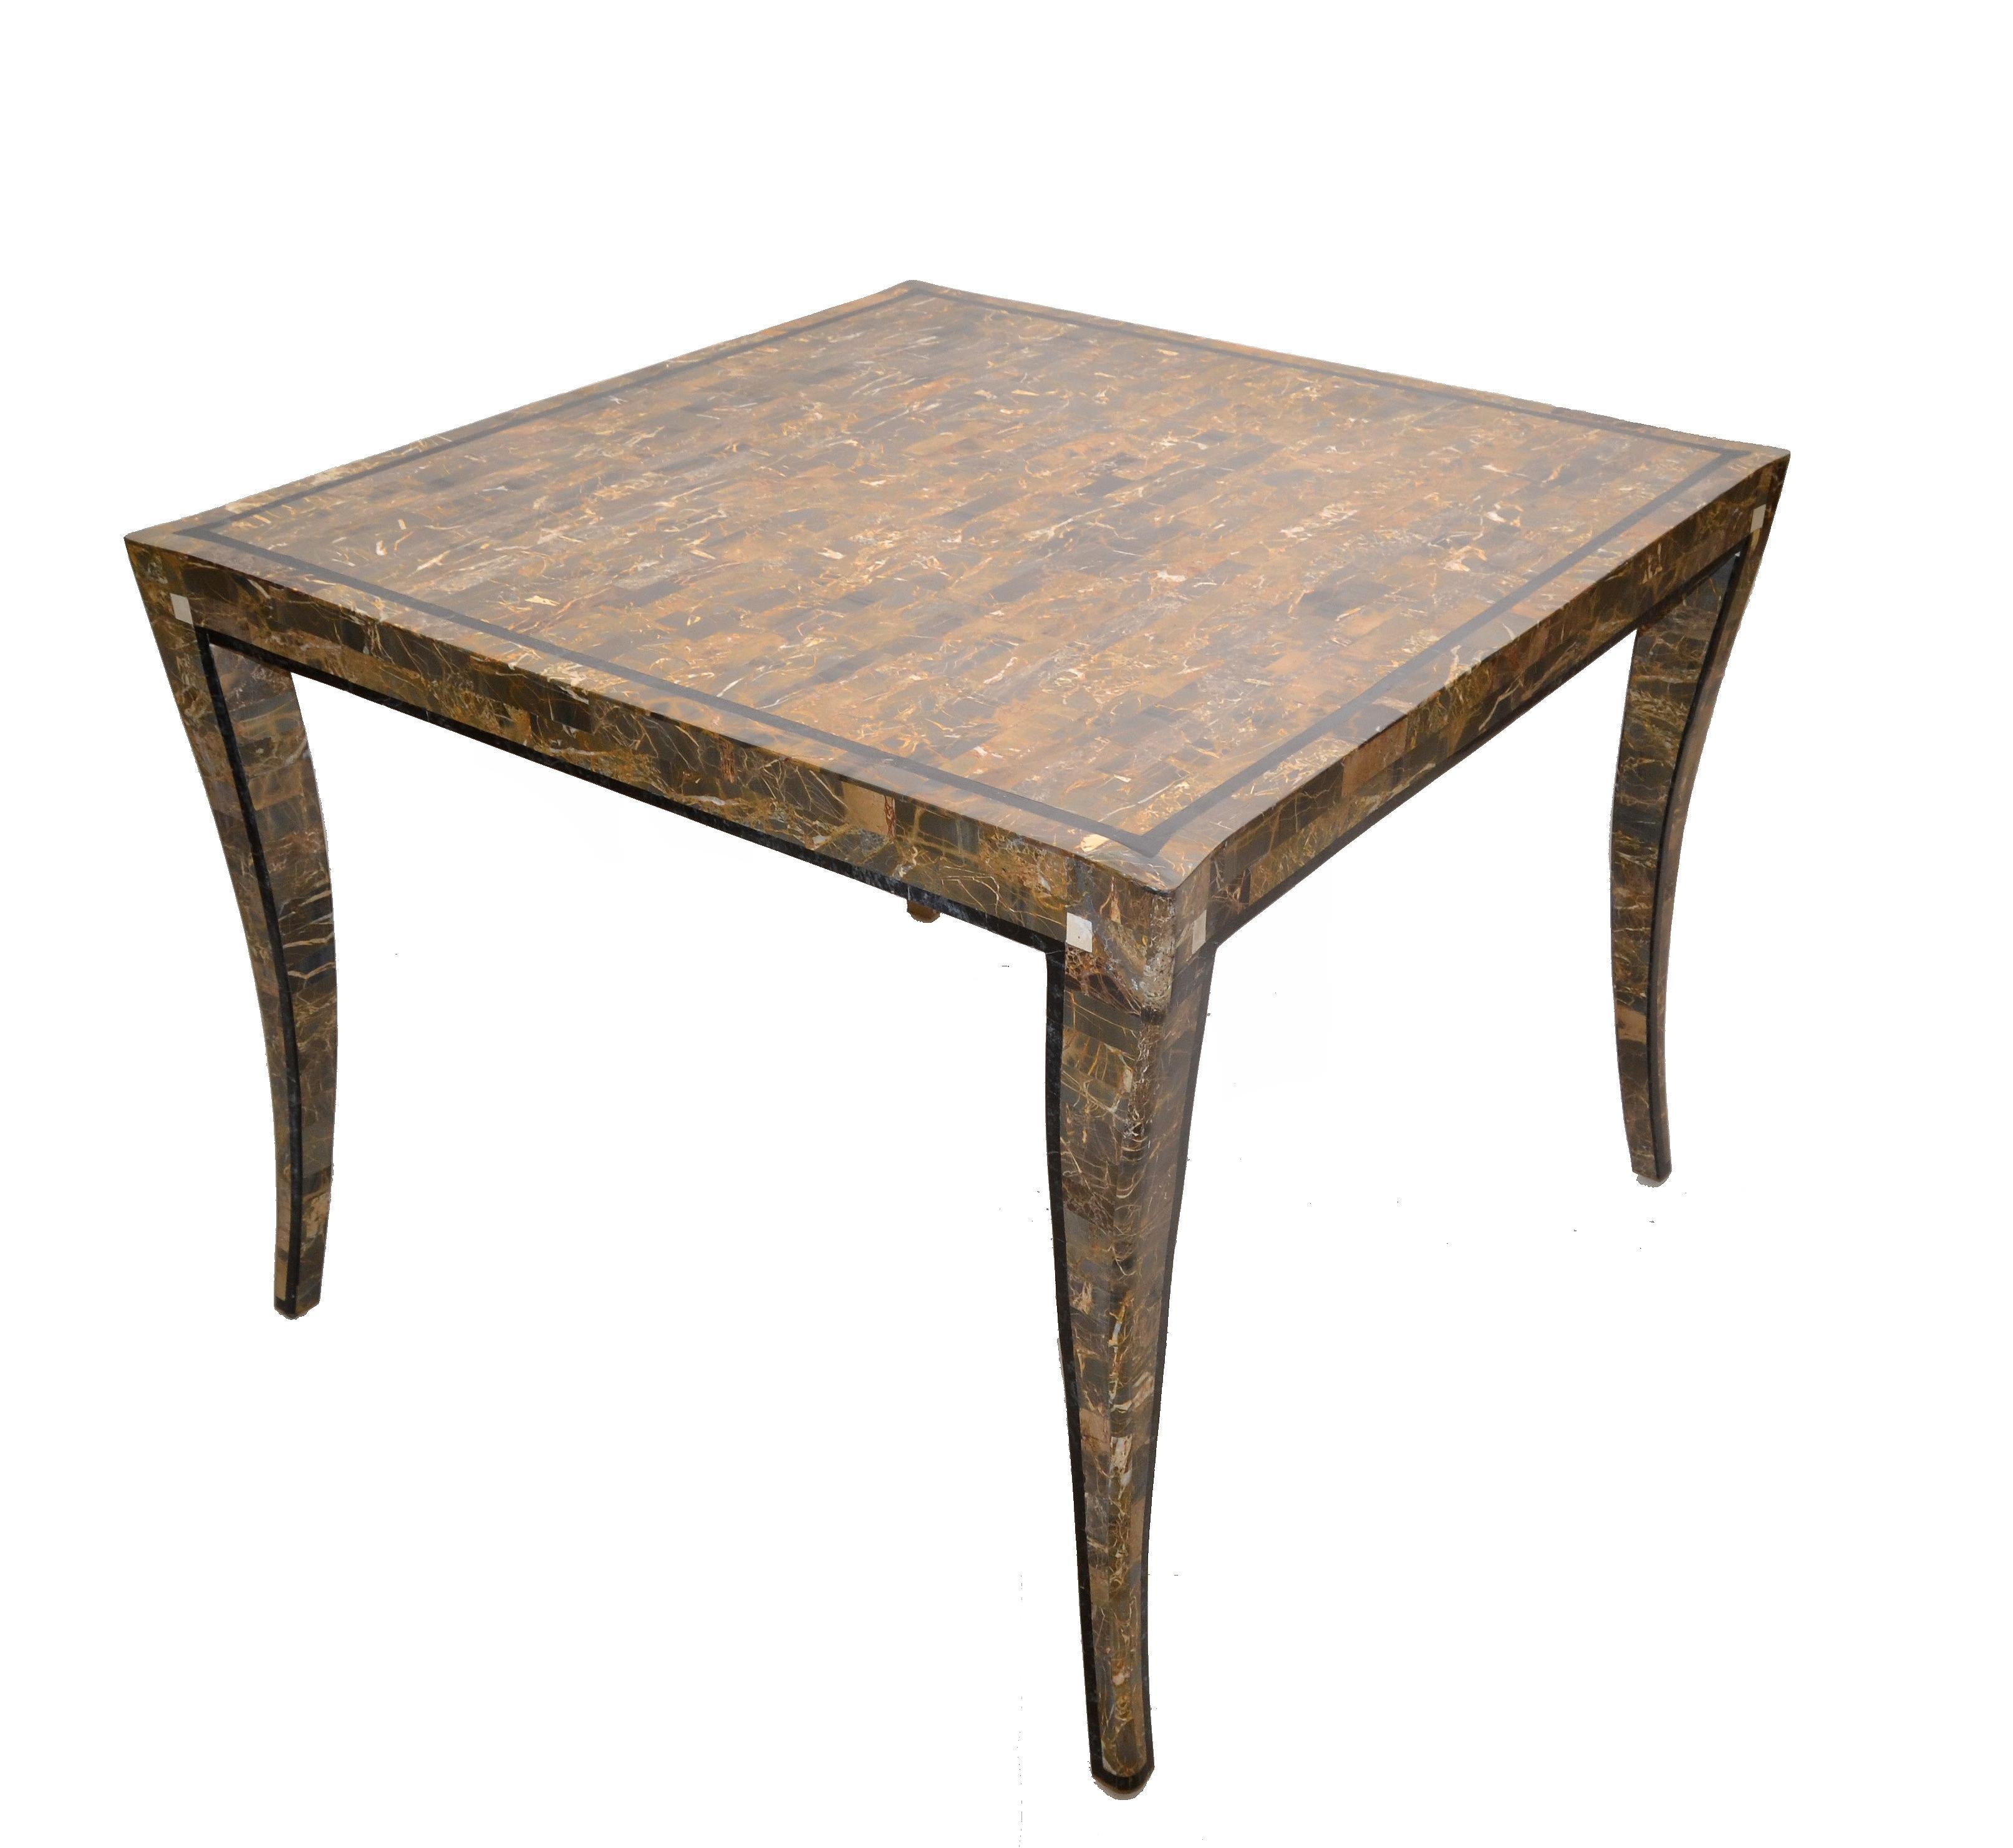 Neoclassical square game table, card & tea table attributed to Maitland Smith.
A gray and cinnamon brown tessellated stone over wood covered table or center table with curved legs.
The Gatherings round this Table brings a lot of fun into Your Home.